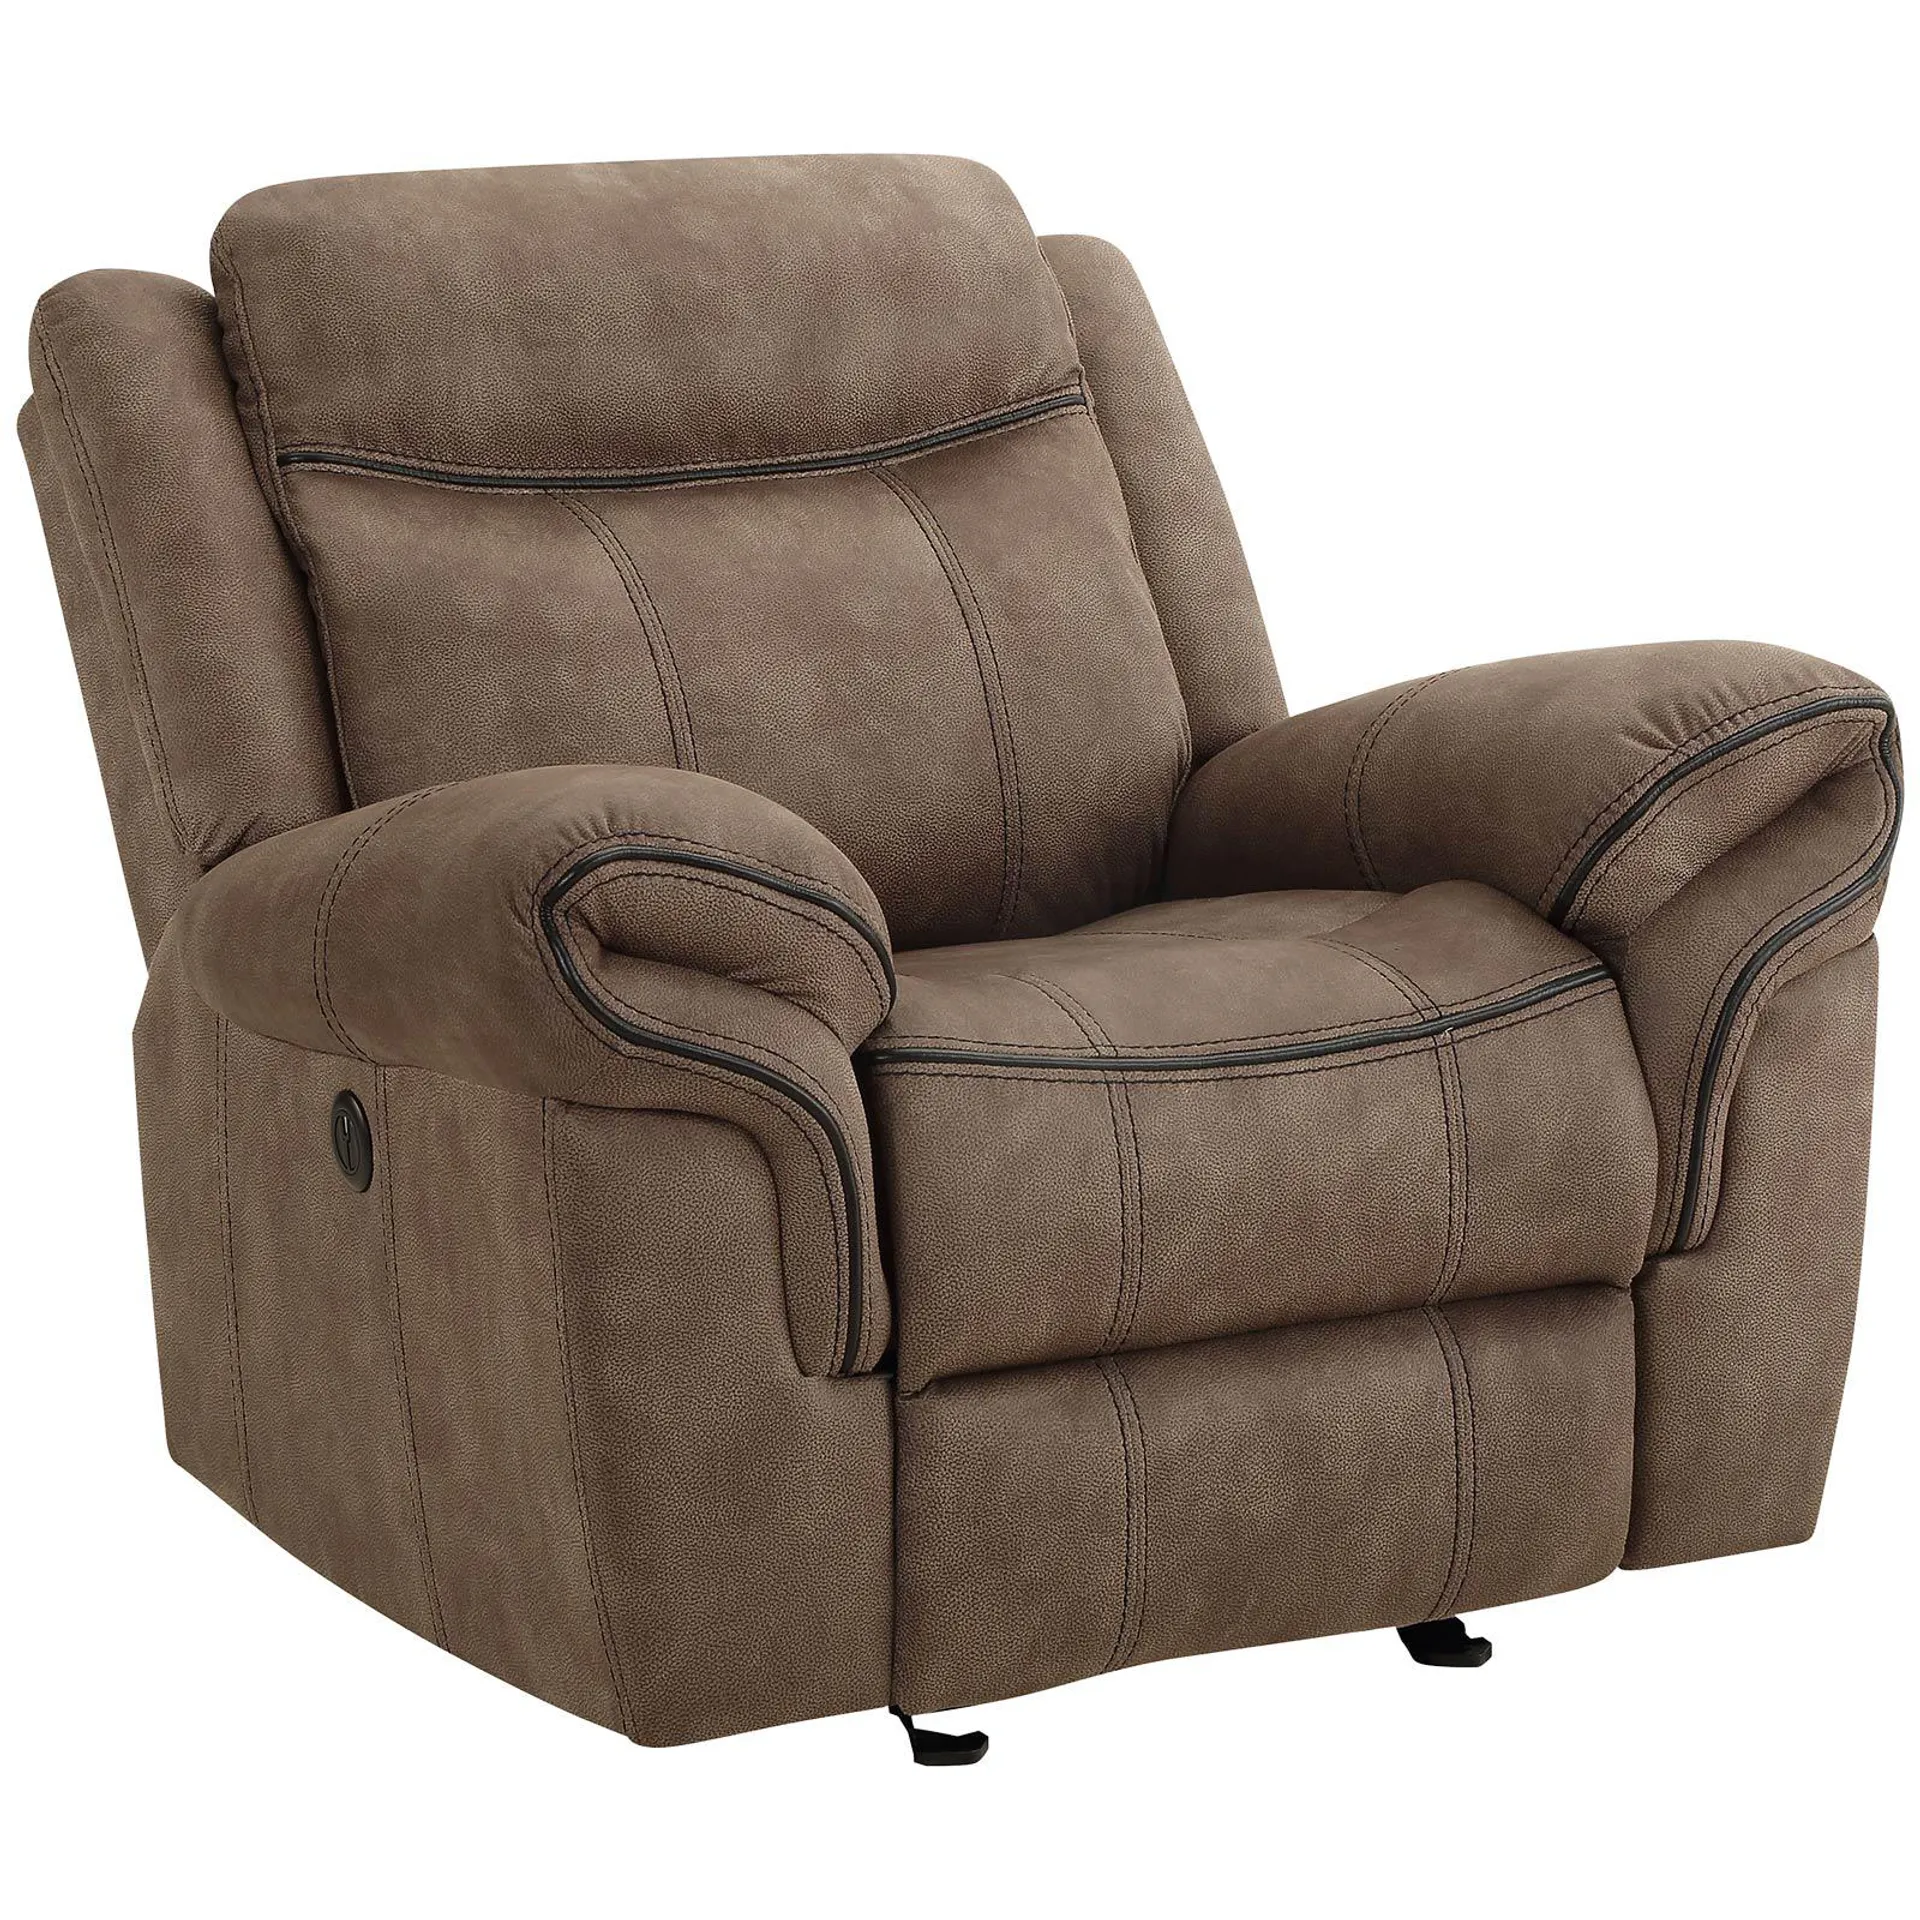 New Classic Furniture Harley Glider Recliner